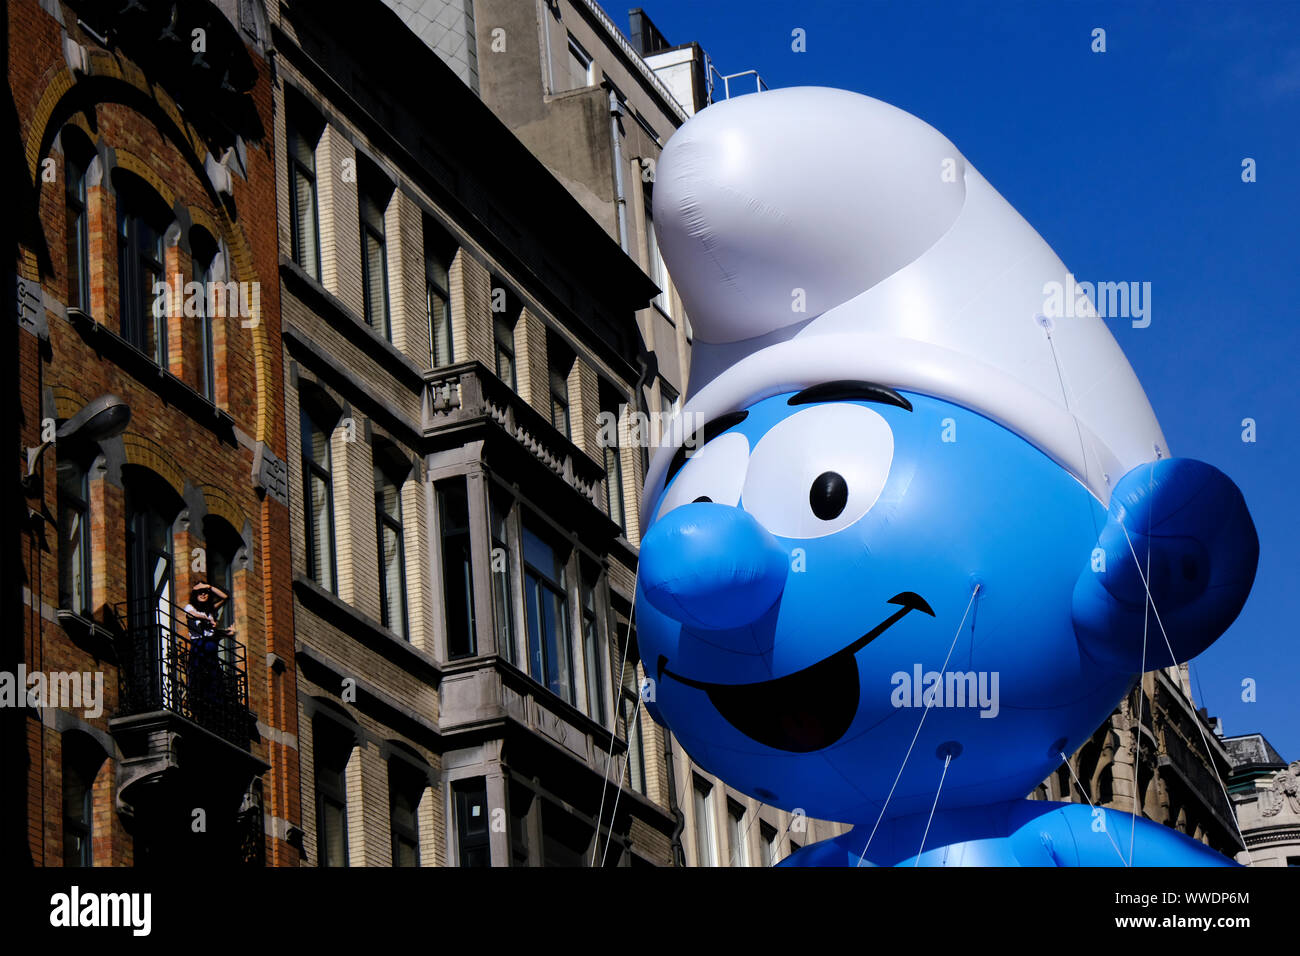 Brussels, Belgium. 15th Sep, 2019. A giant balloon of a Smurf comic strip character floats during the Balloon Day Parade along the downtown boulevards in Brussels, Belgium September 15, 2019. Credit: ALEXANDROS MICHAILIDIS/Alamy Live News Stock Photo